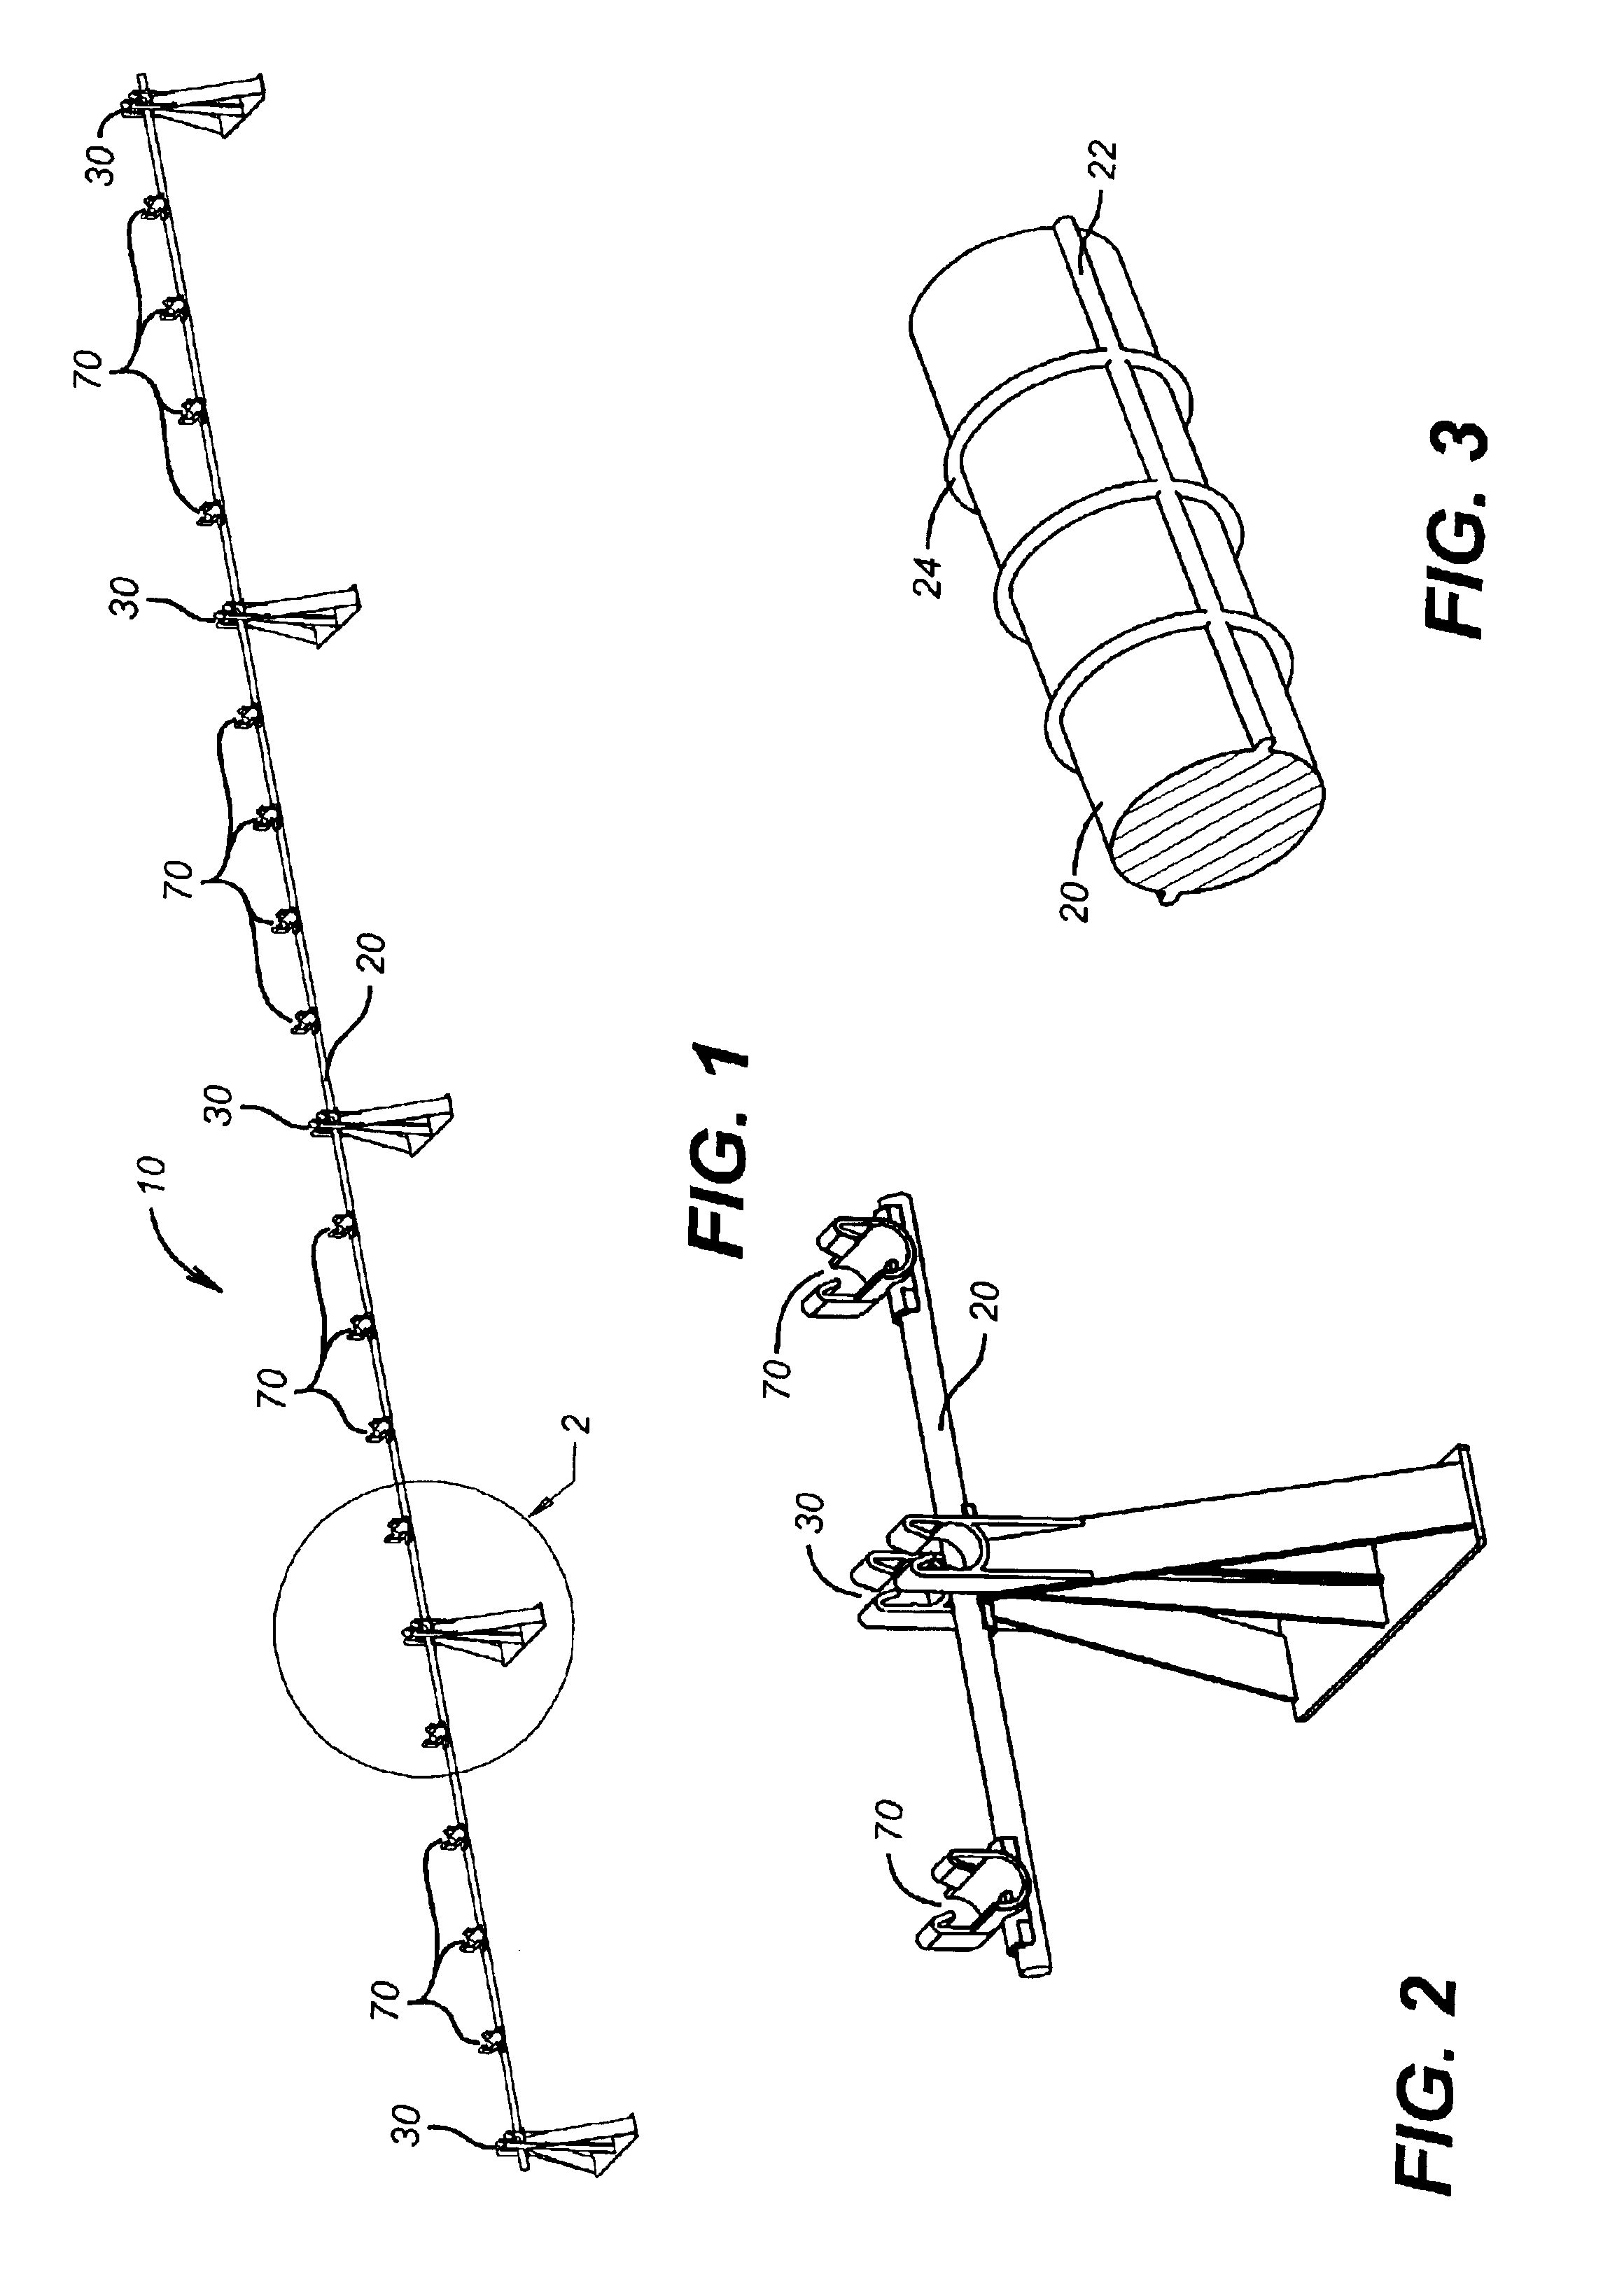 Apparatus for placing rebar in continuously reinforced concrete paving